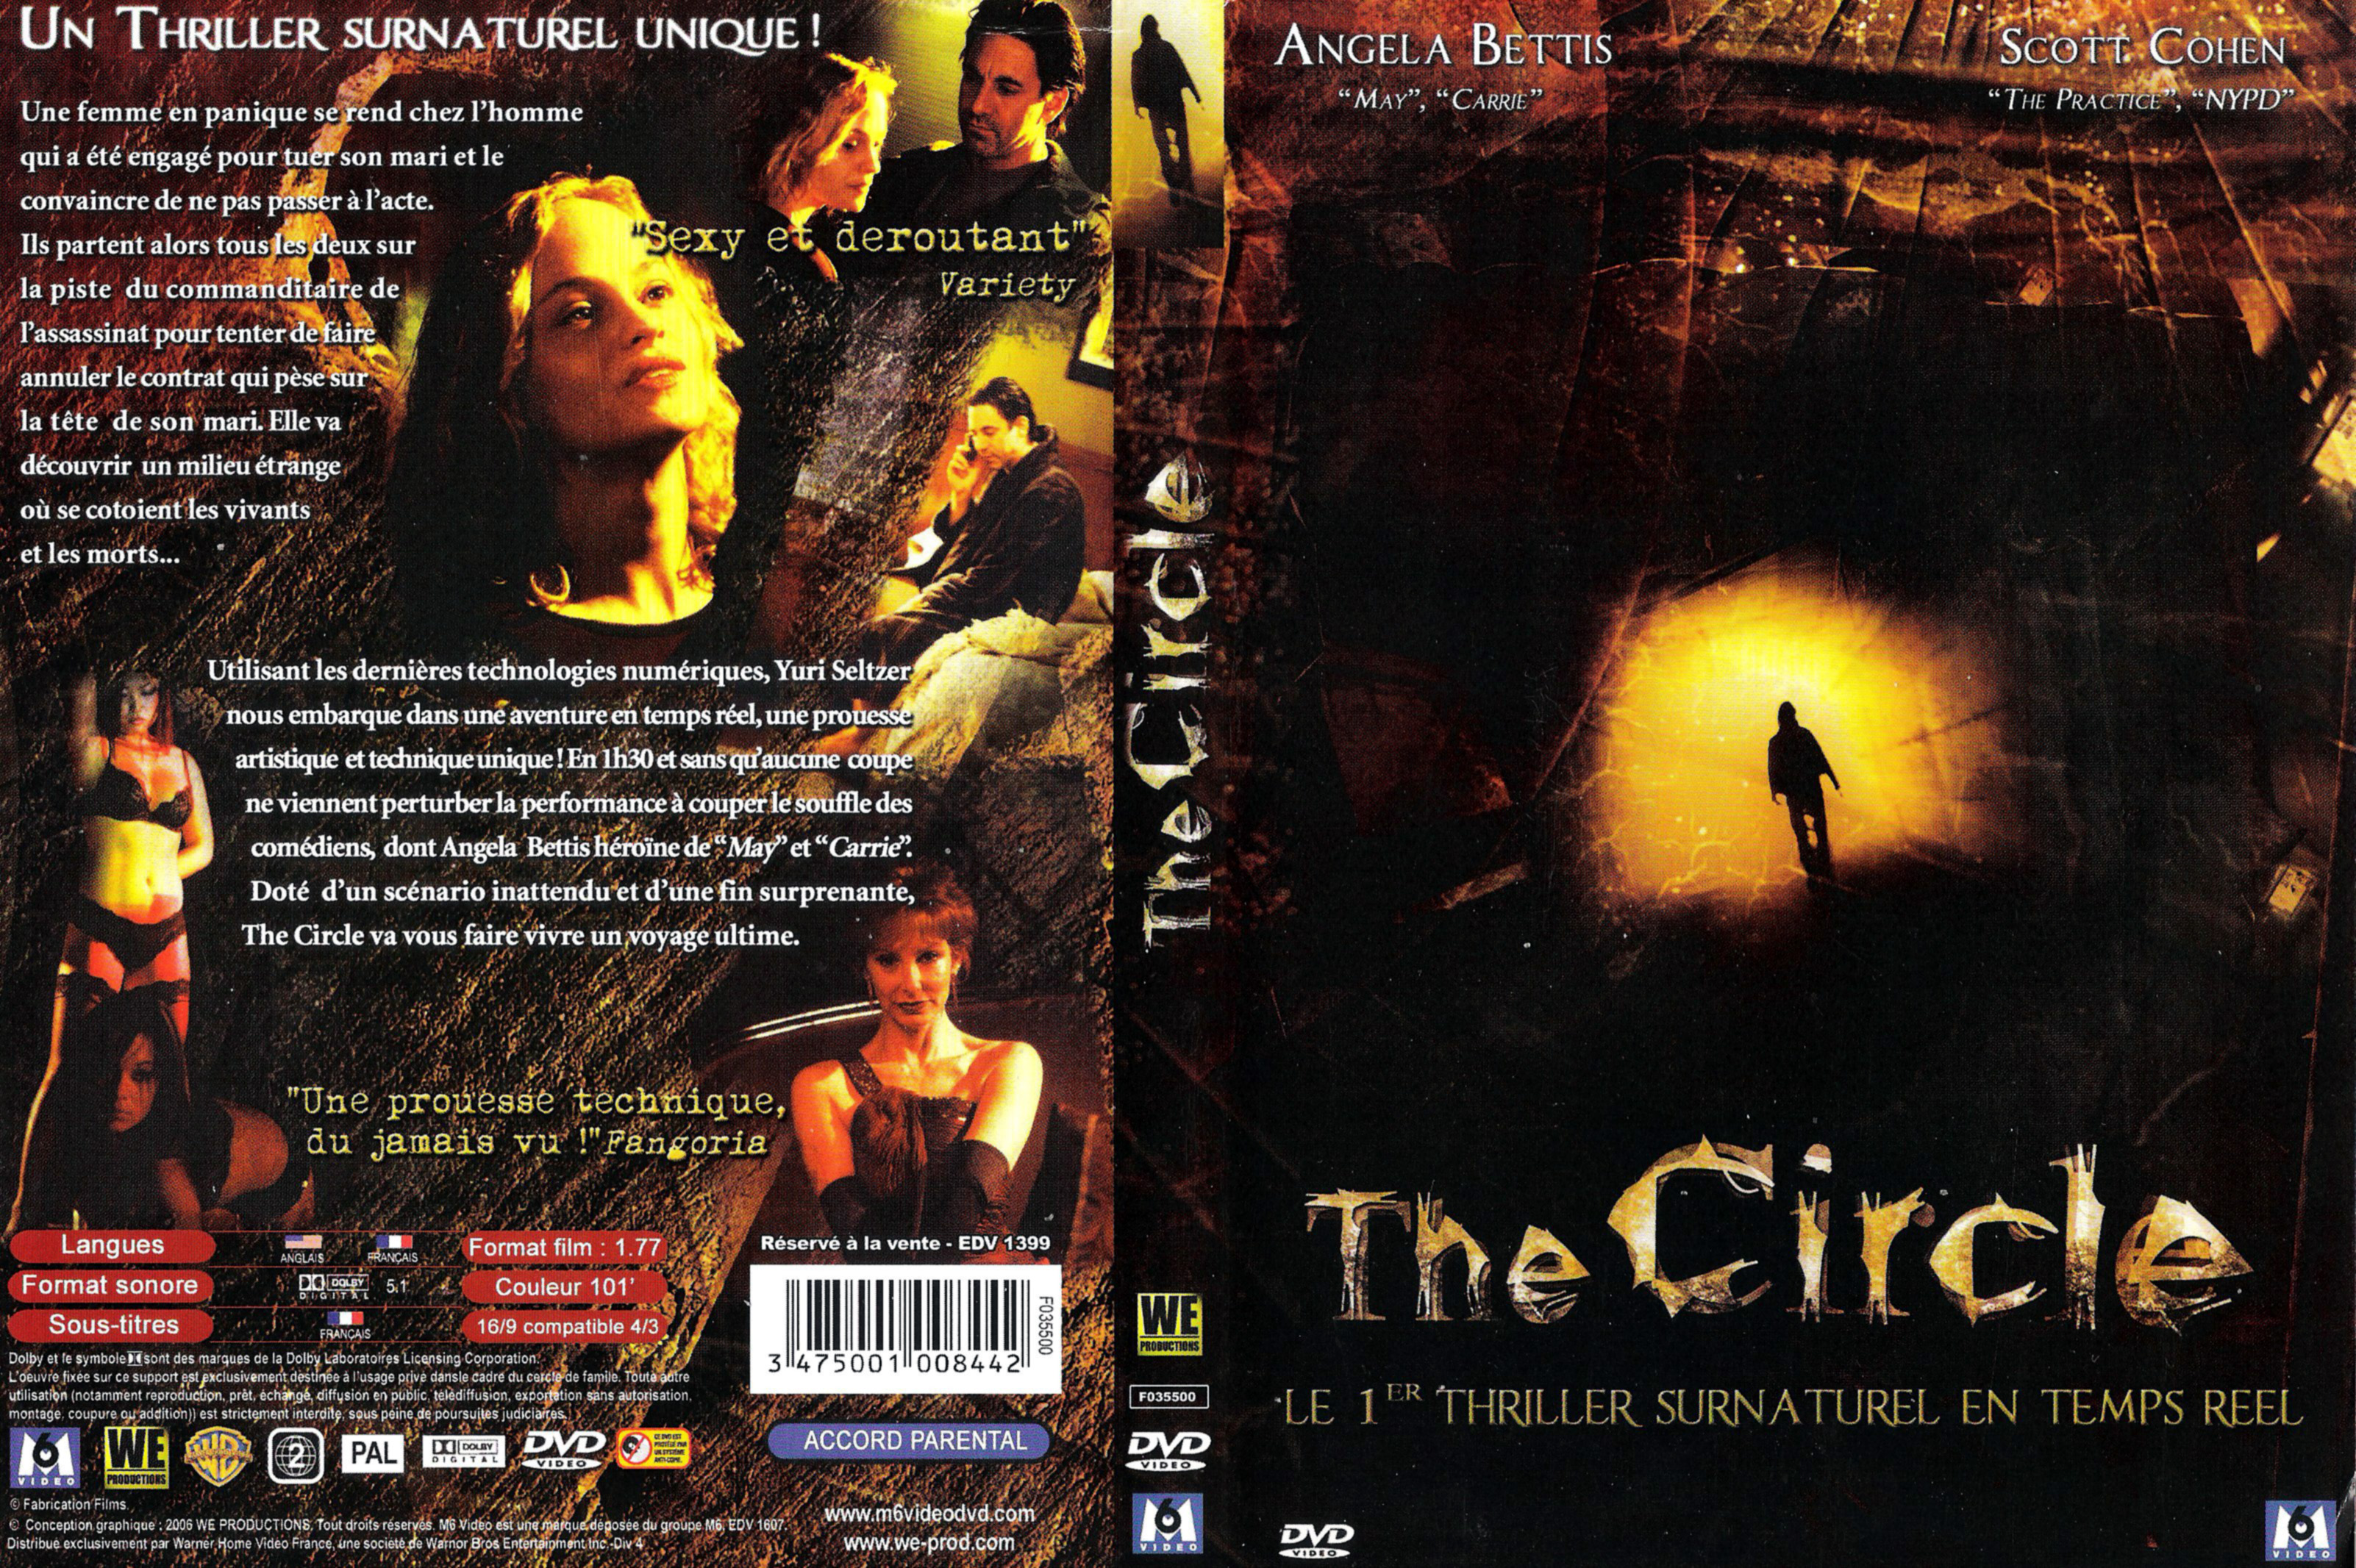 Jaquette DVD The circle